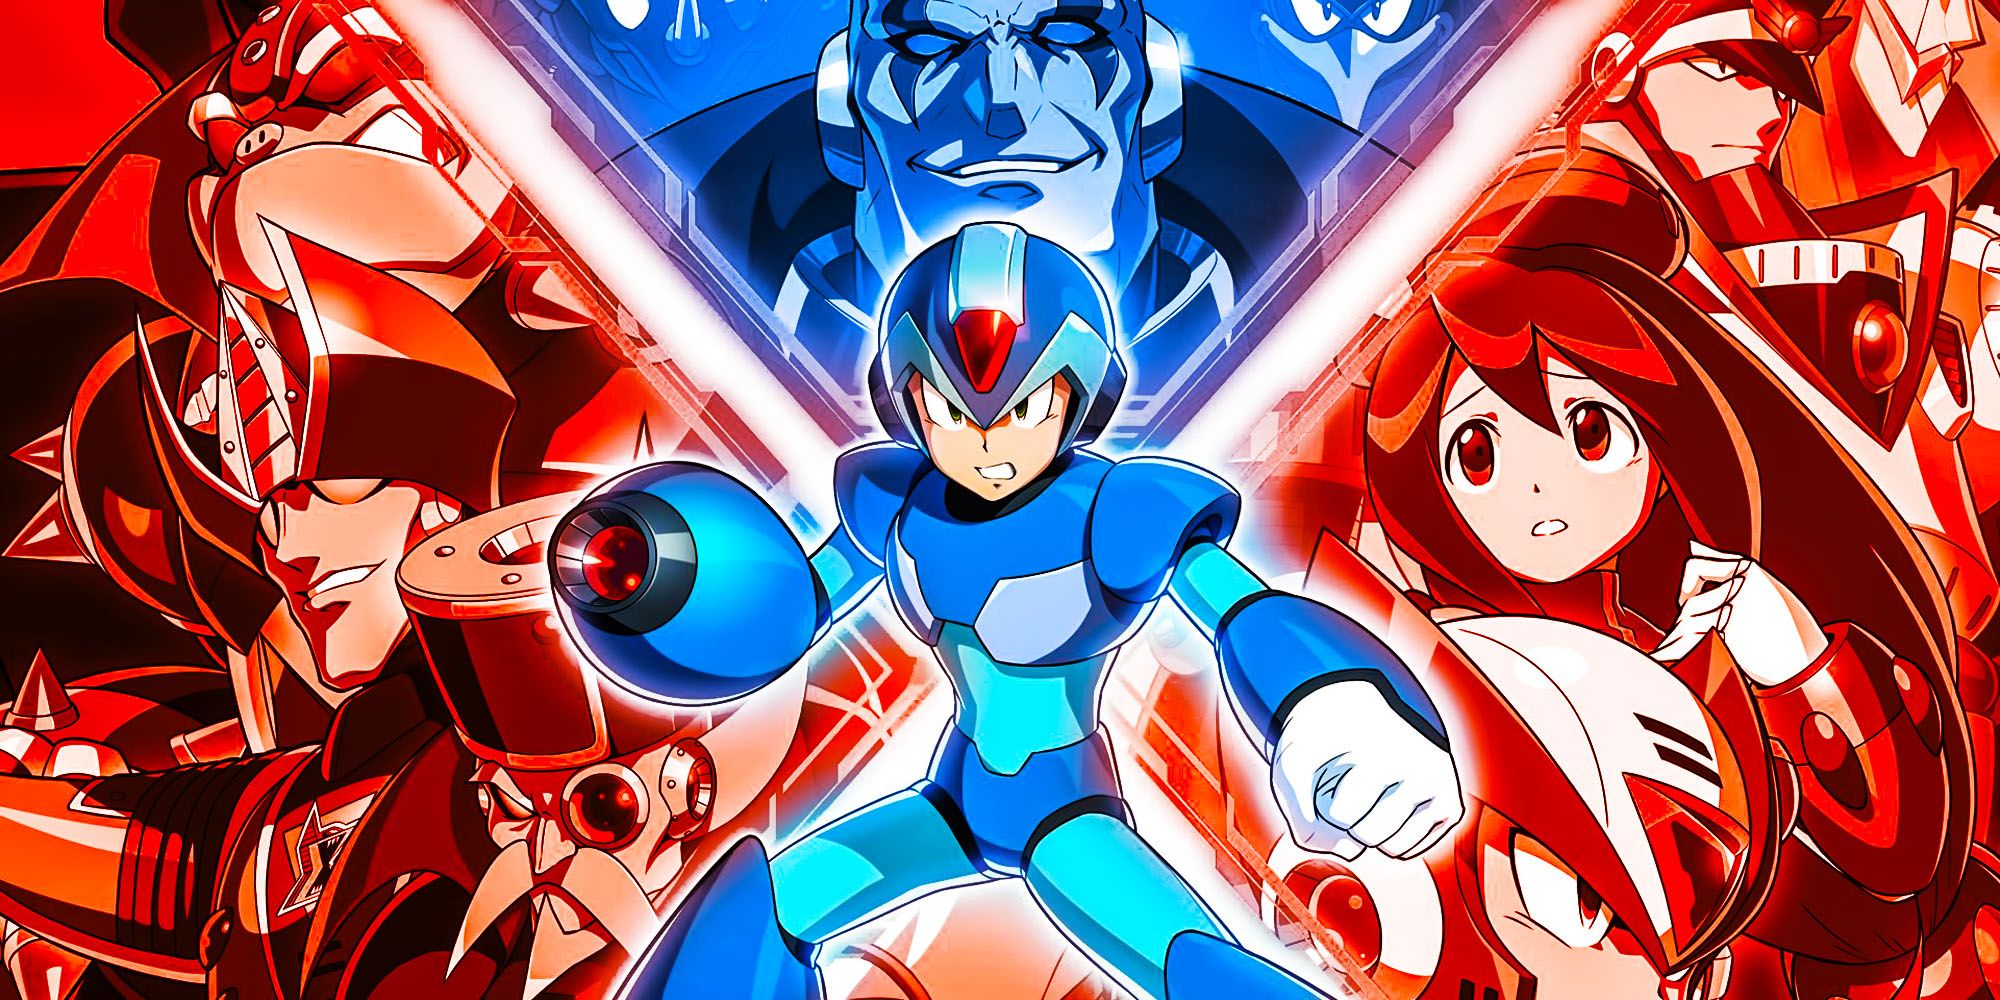 Mega Man standing in front of artwork for his games